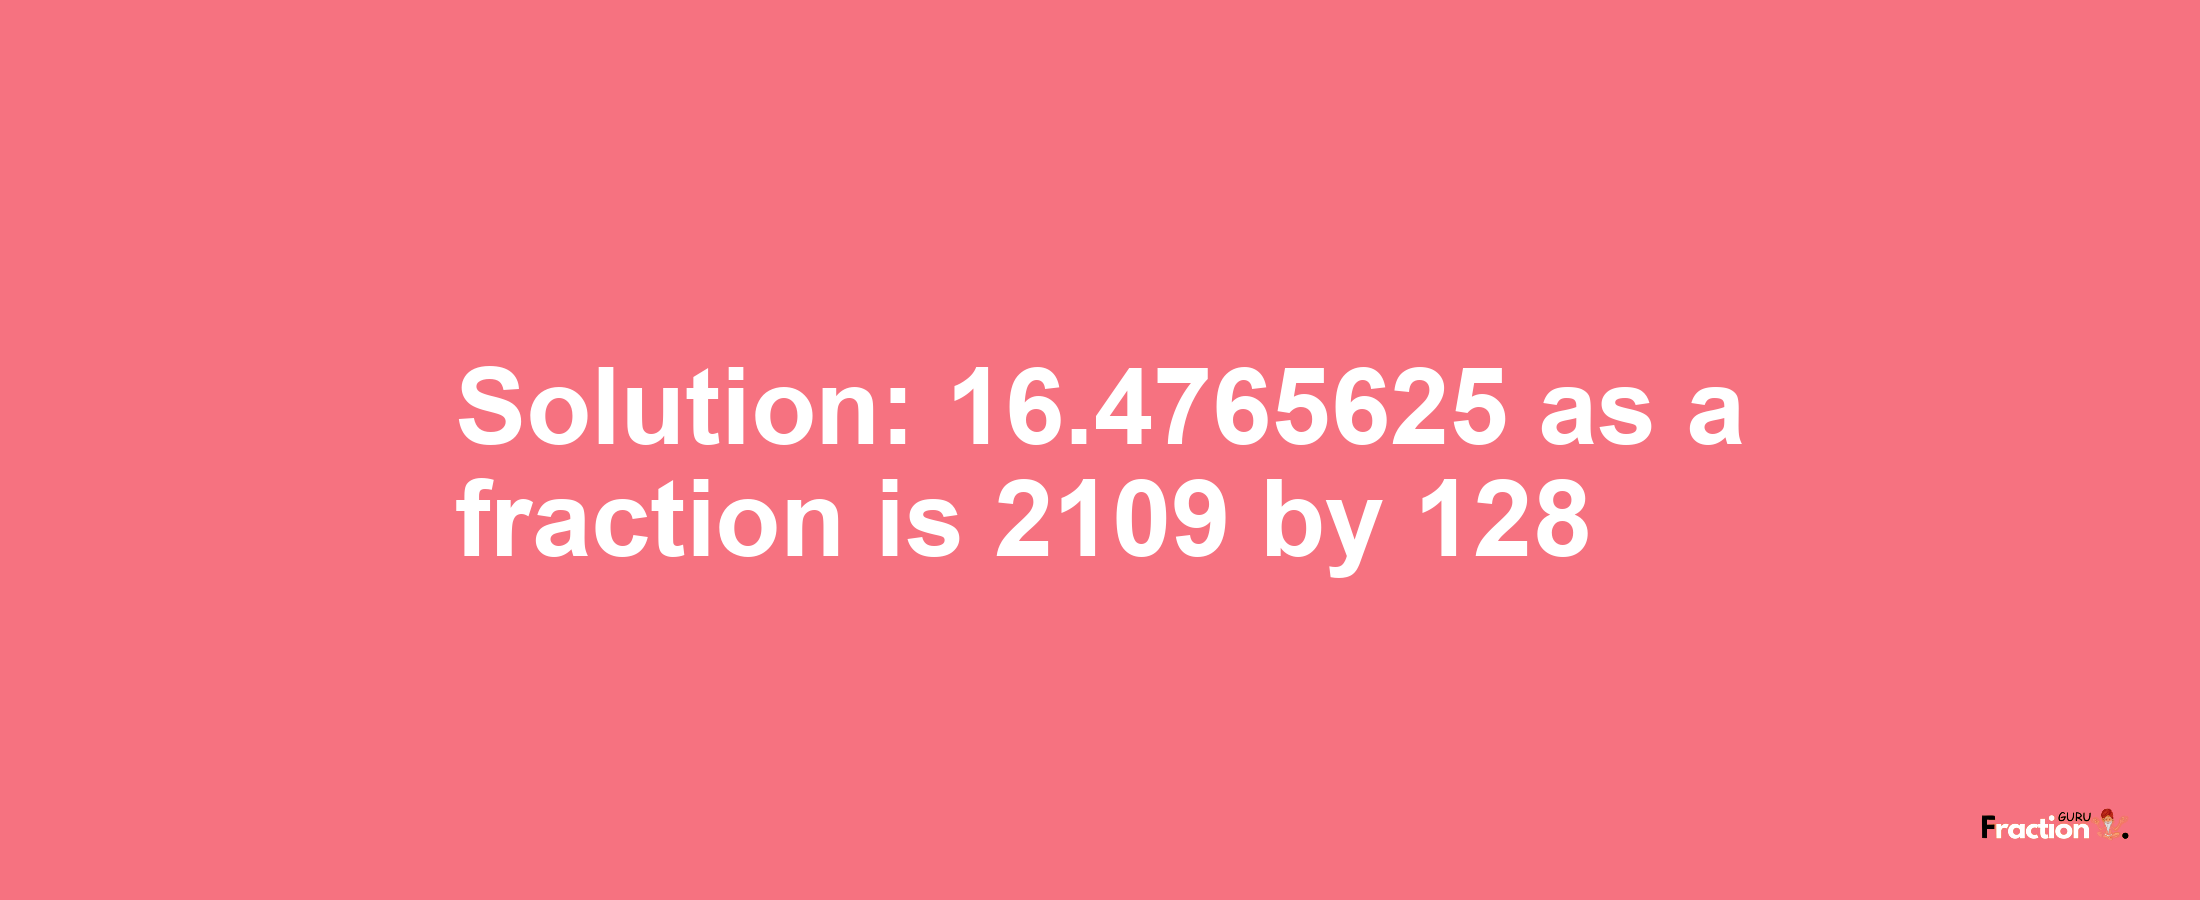 Solution:16.4765625 as a fraction is 2109/128